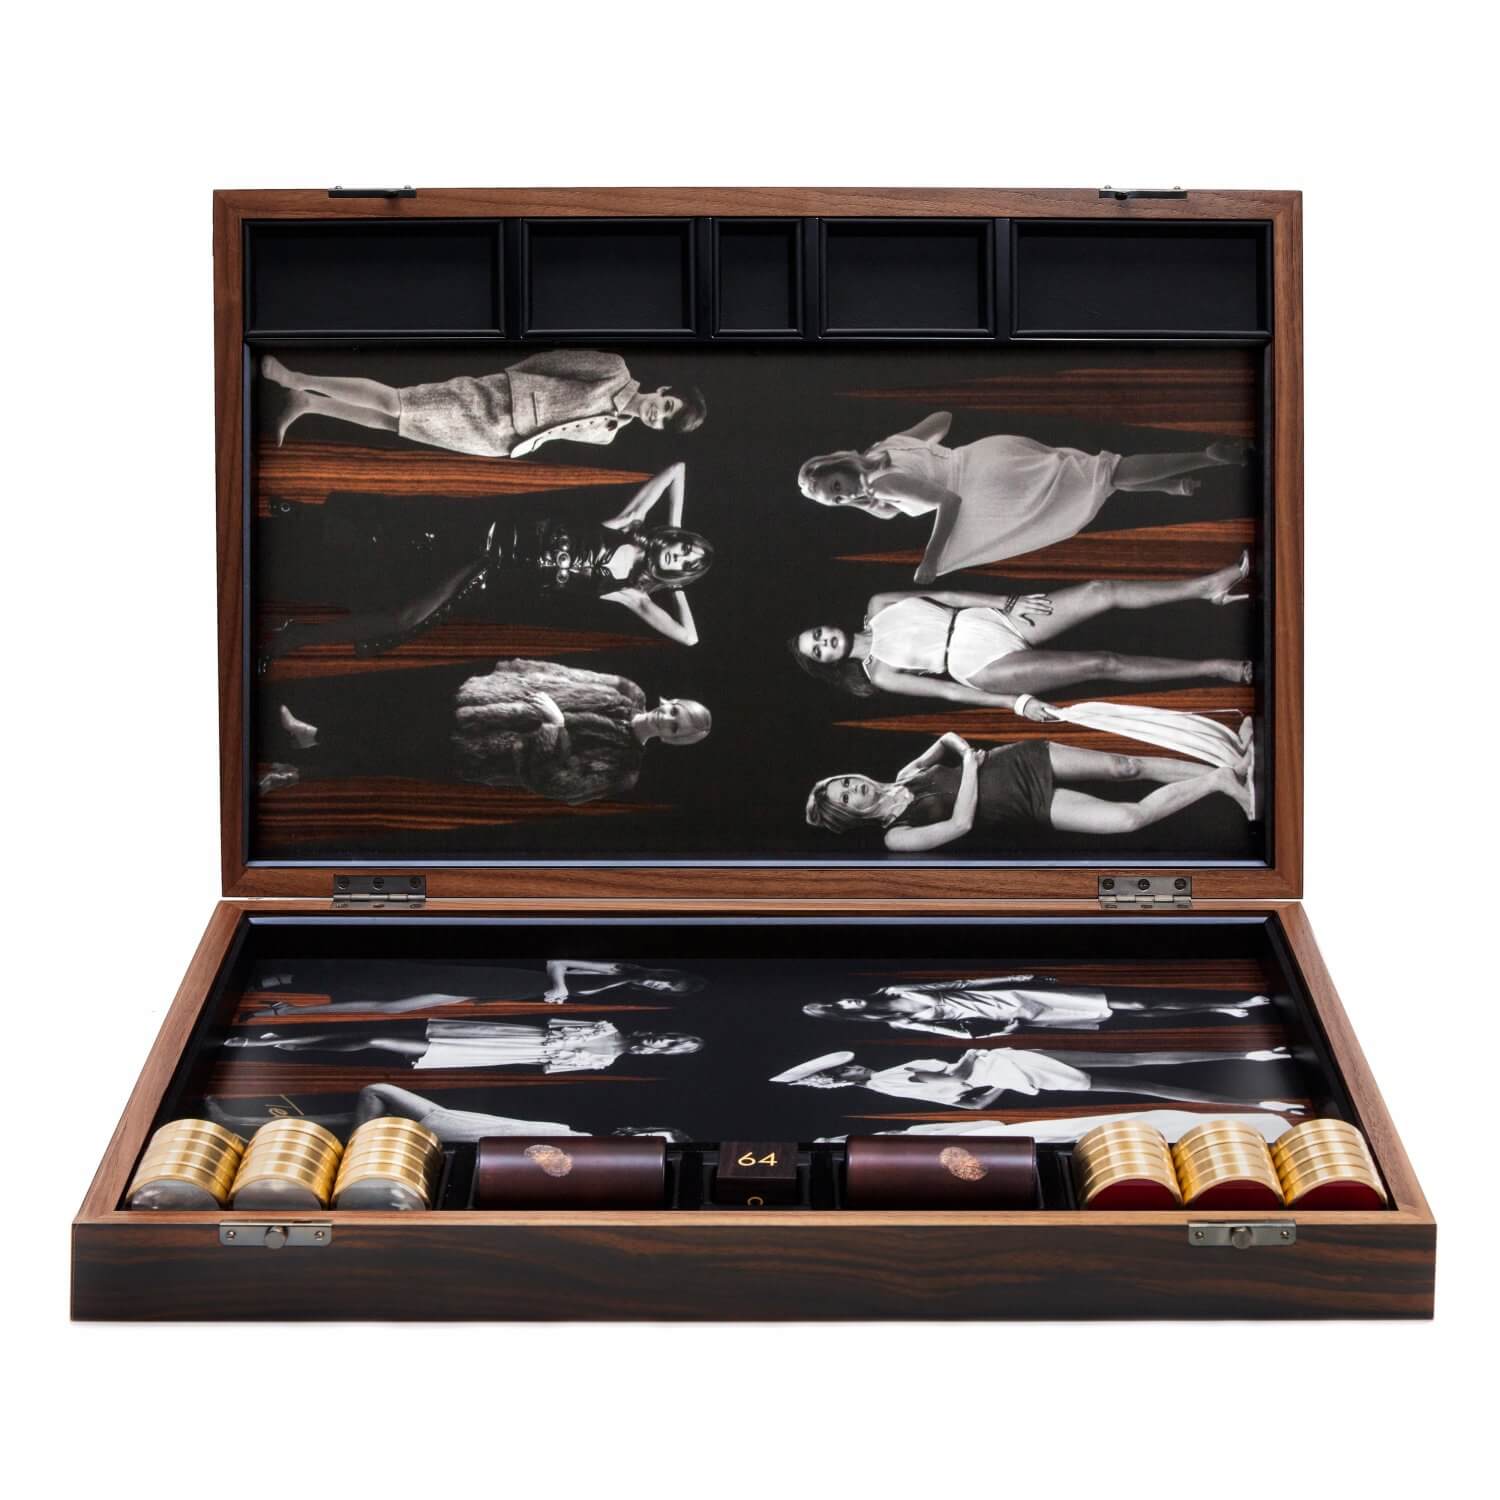 Goddesses backgammon board in an Ebony box with Red Jasper and Mother of Pearl playing pieces